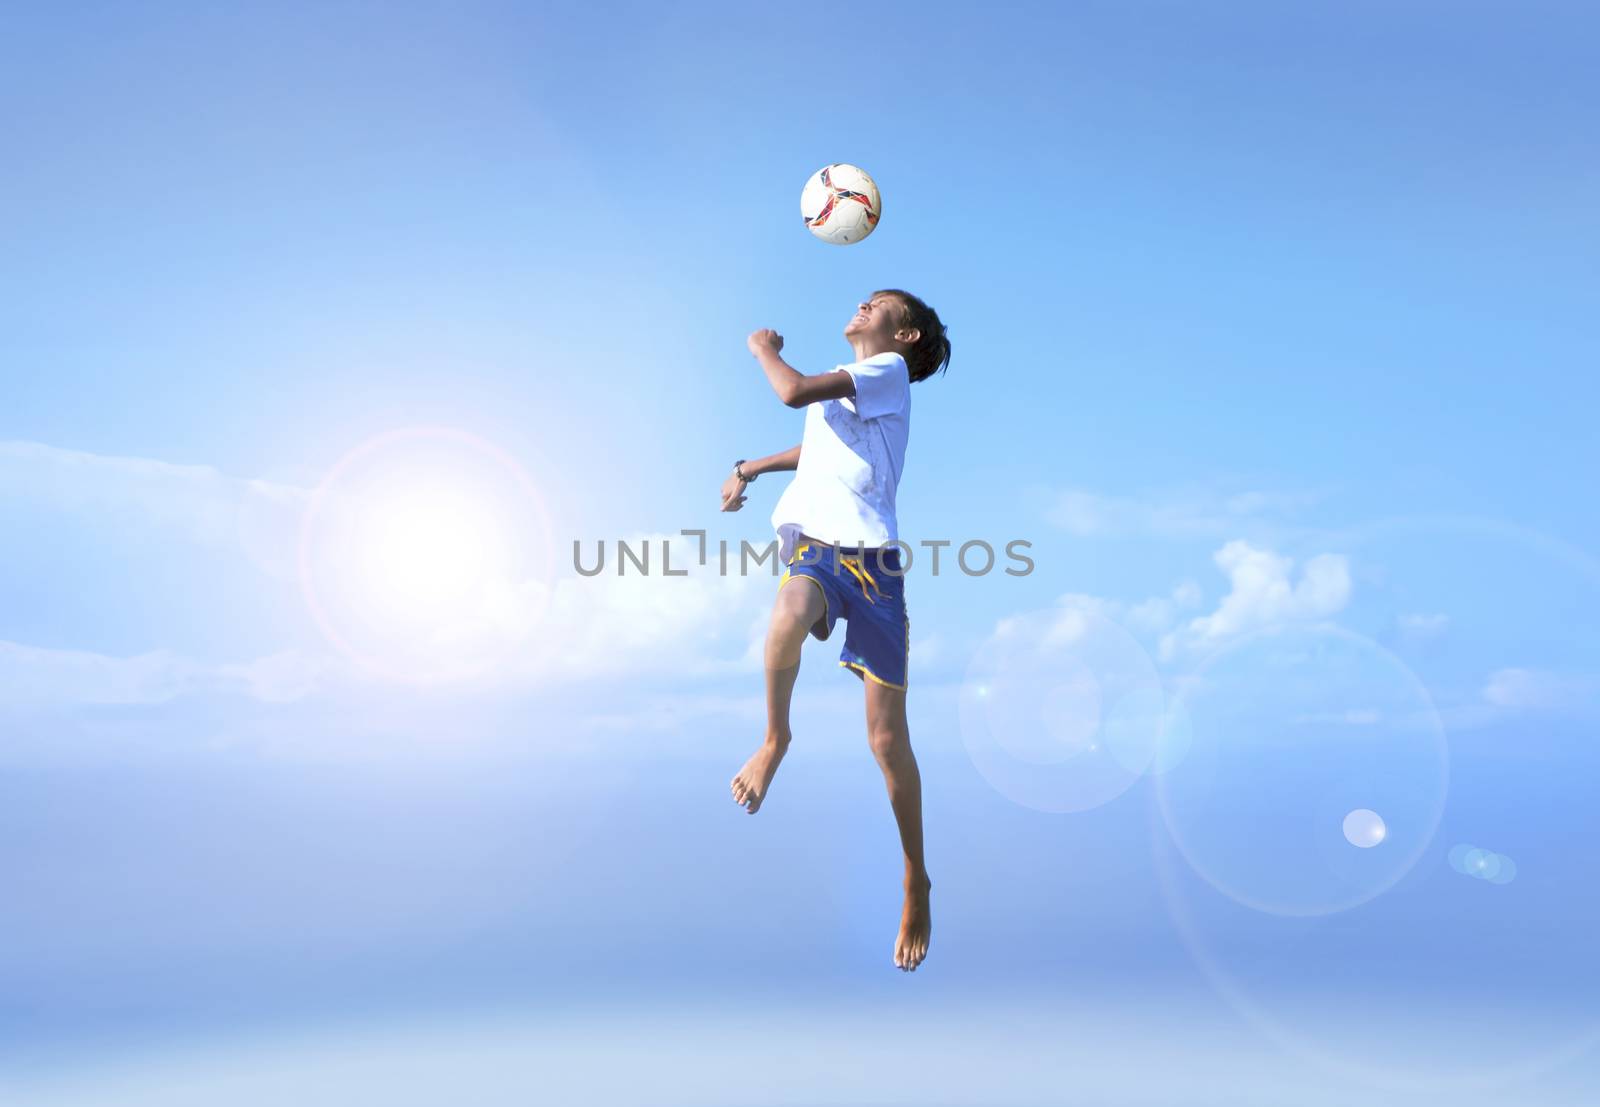 MOTION BLUR SHOT. A young boy in a jump, football player doing amazing makes a headbutt a background of blue sky. Happy, joy, good mood